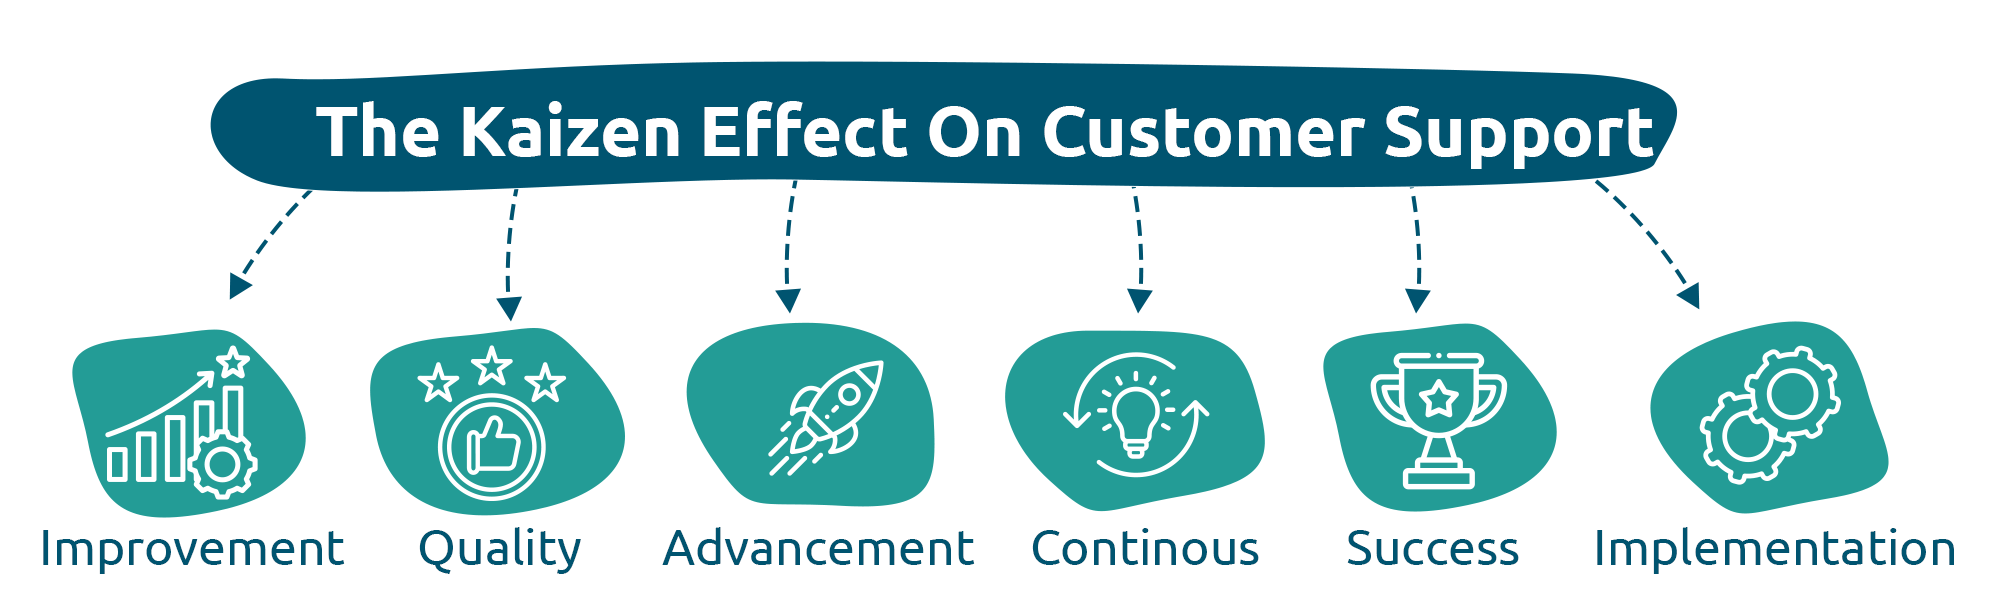 The-Kaizen-Effect-On-Customer-Support_Blog-Infographic